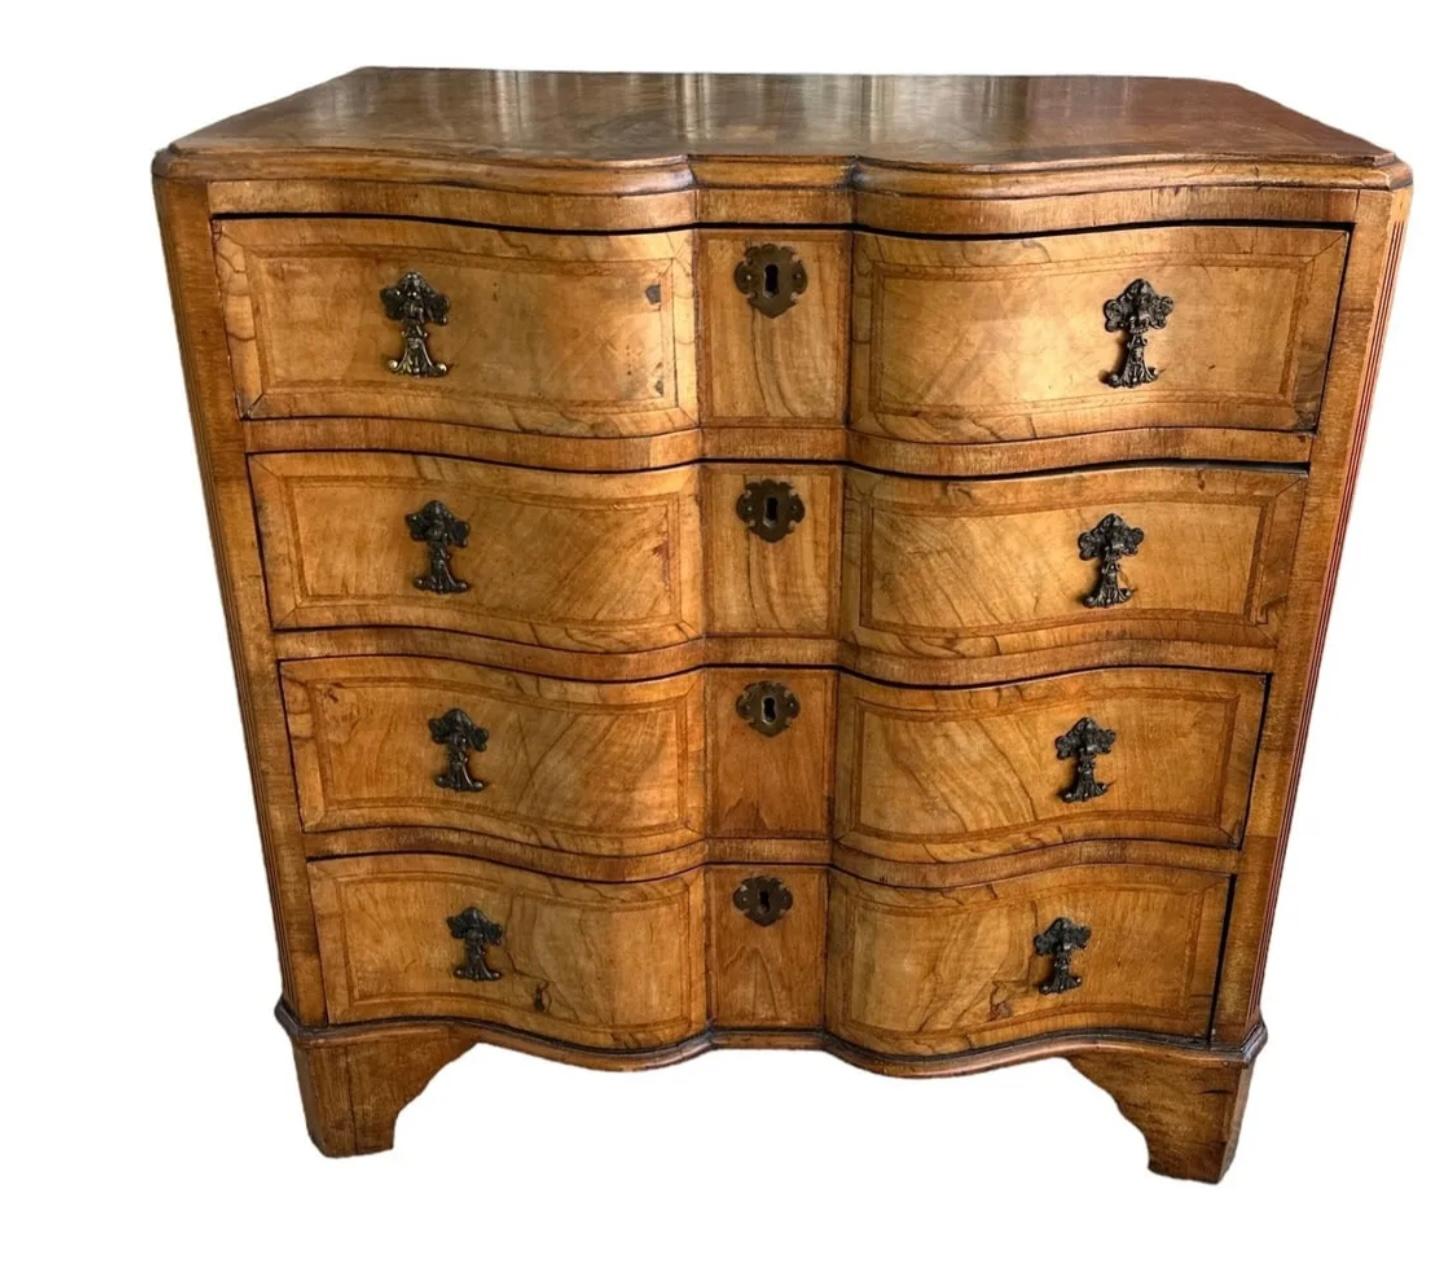 Early Banded Inlaid Walnut Serpentine Front Chest 1